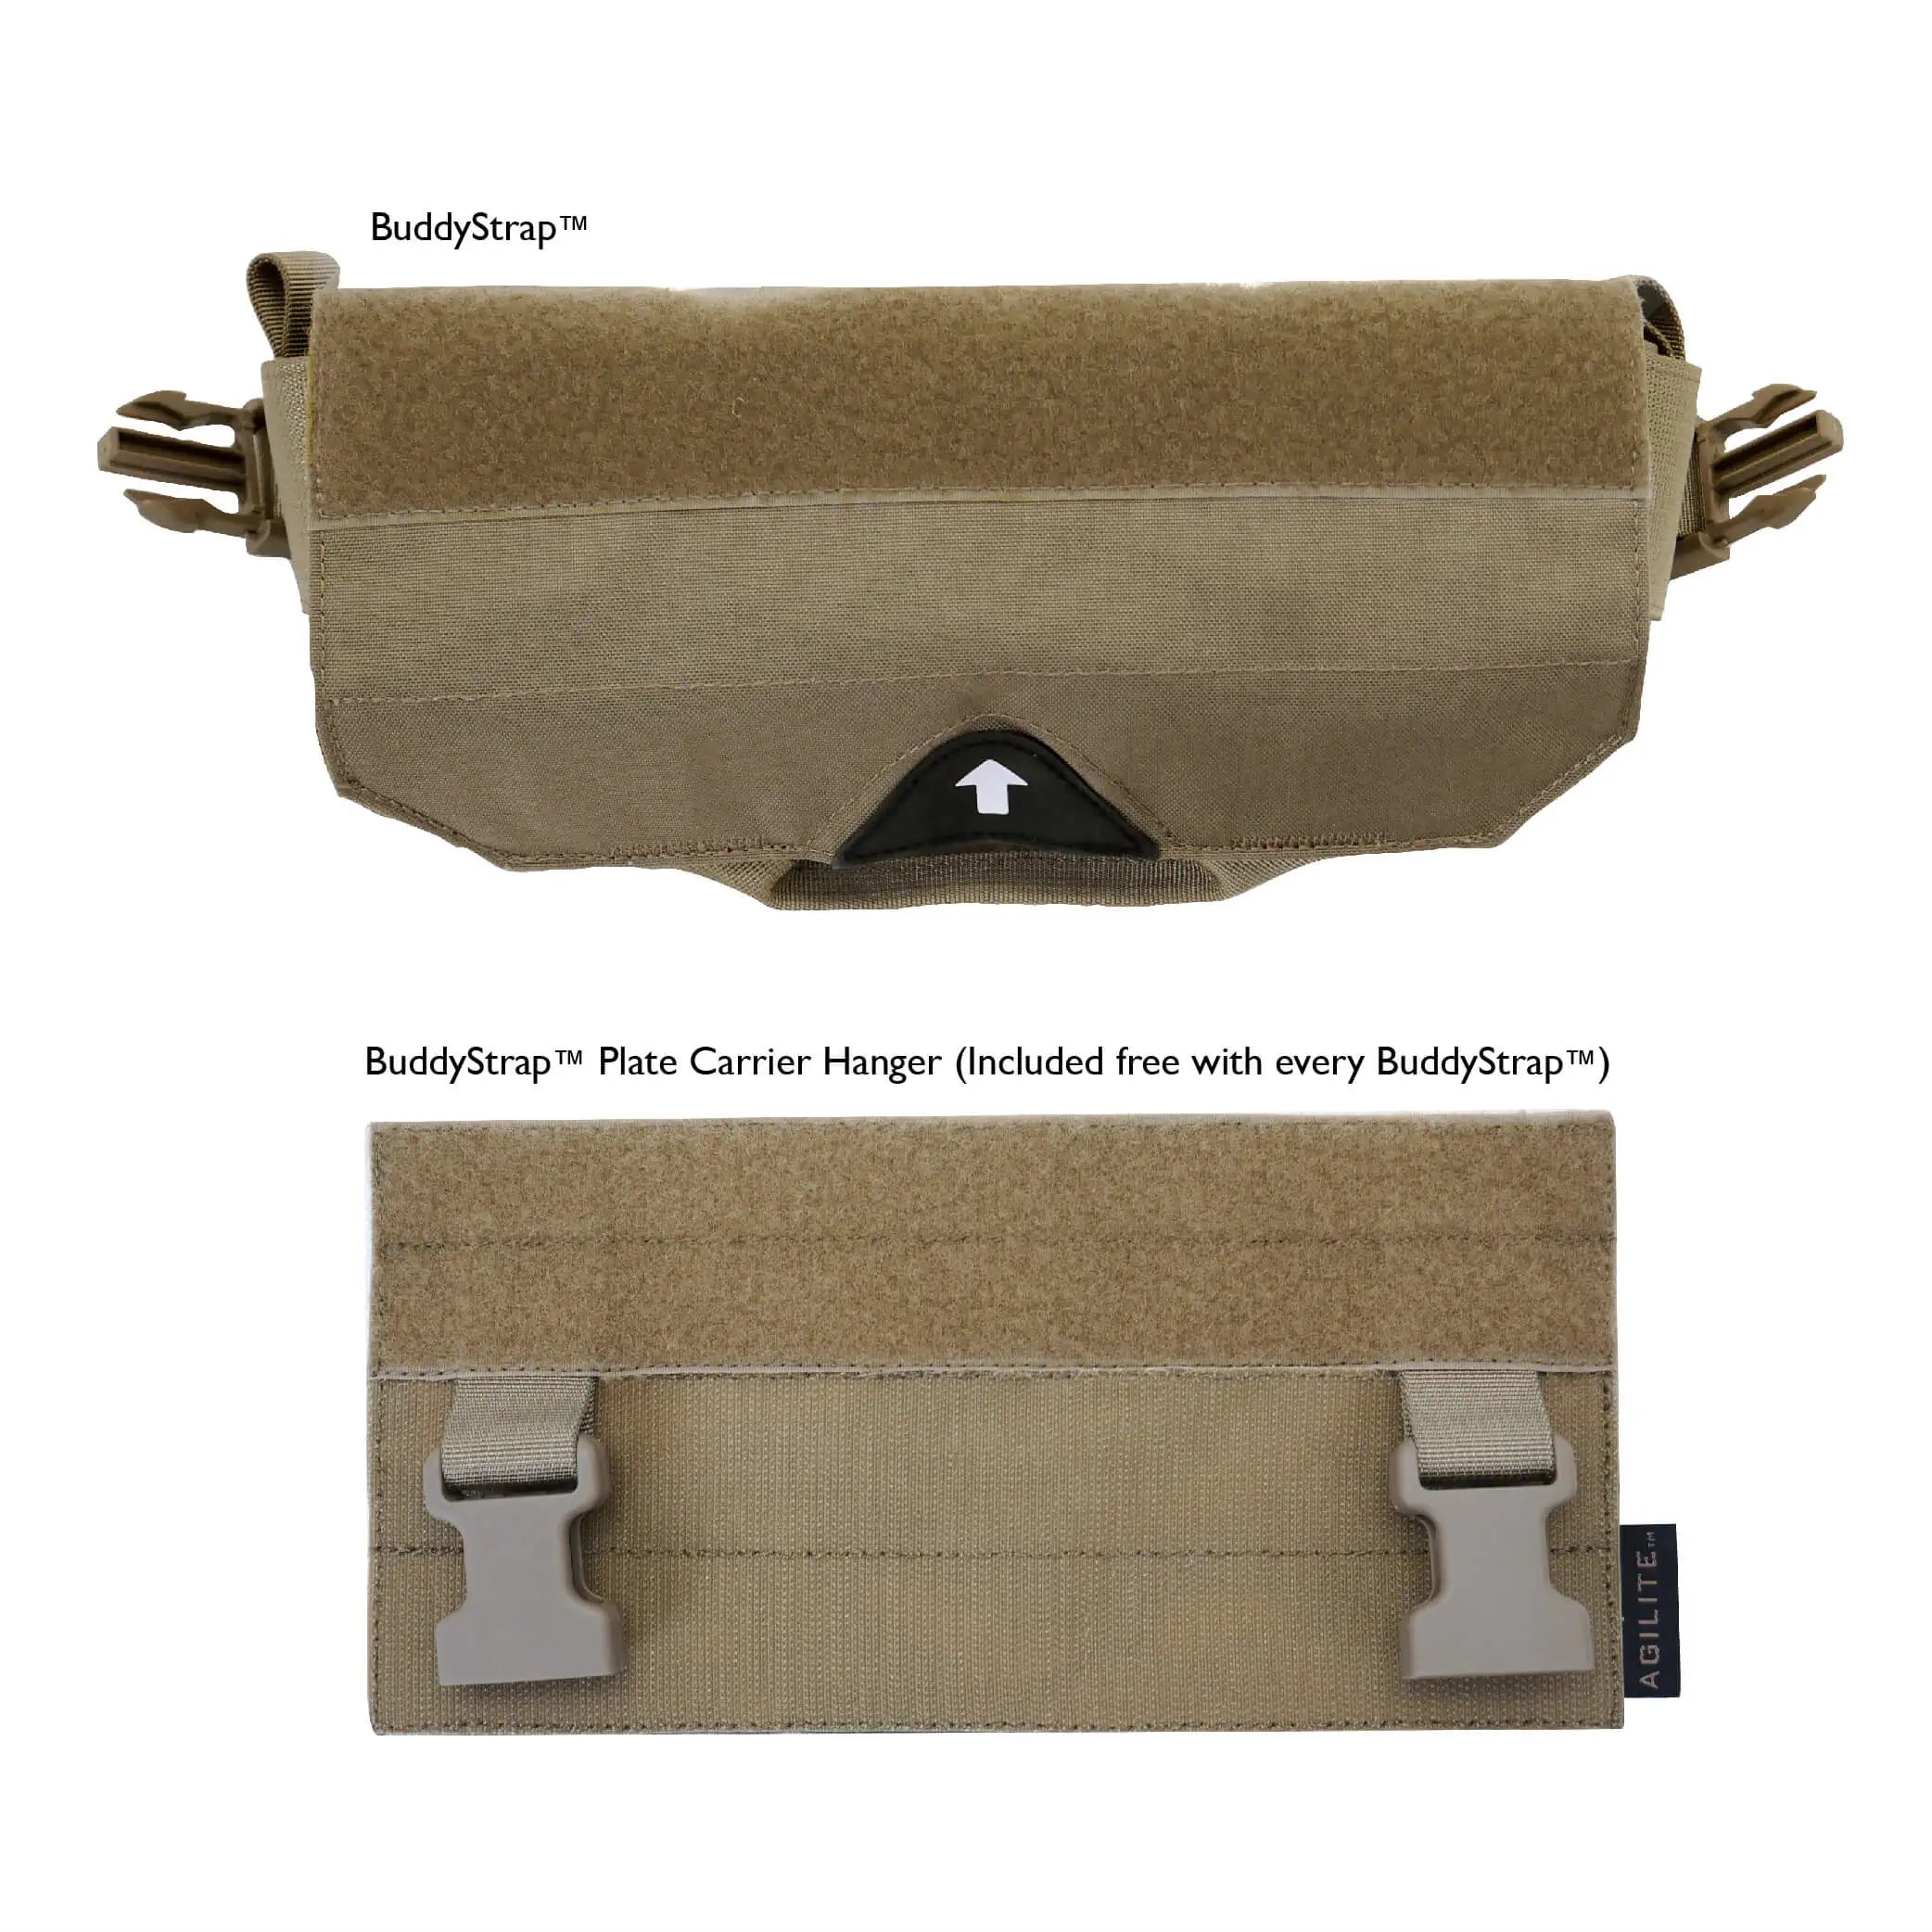 BuddyStrap™ Injured Person Carrier Coyote Tan + Hanger